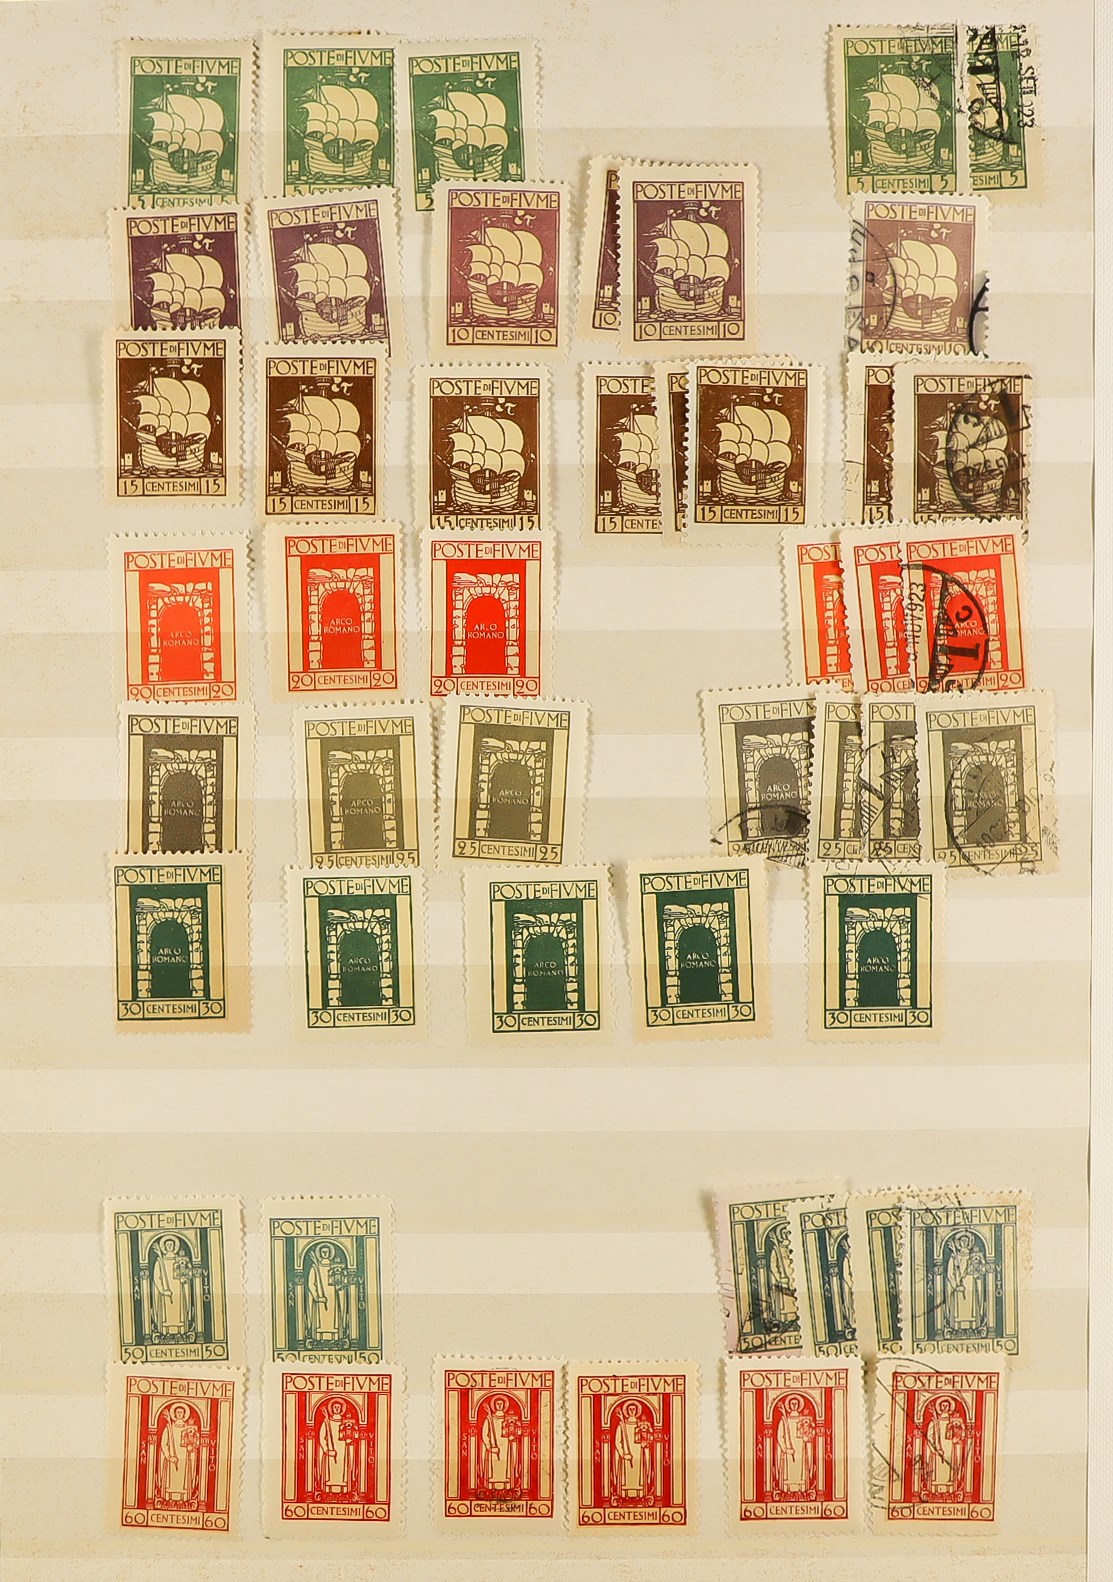 FIUME 1918 - 1924 ACCUMULATION of around 1500 mint & used stamps in stockbook, various overprints on - Image 18 of 29